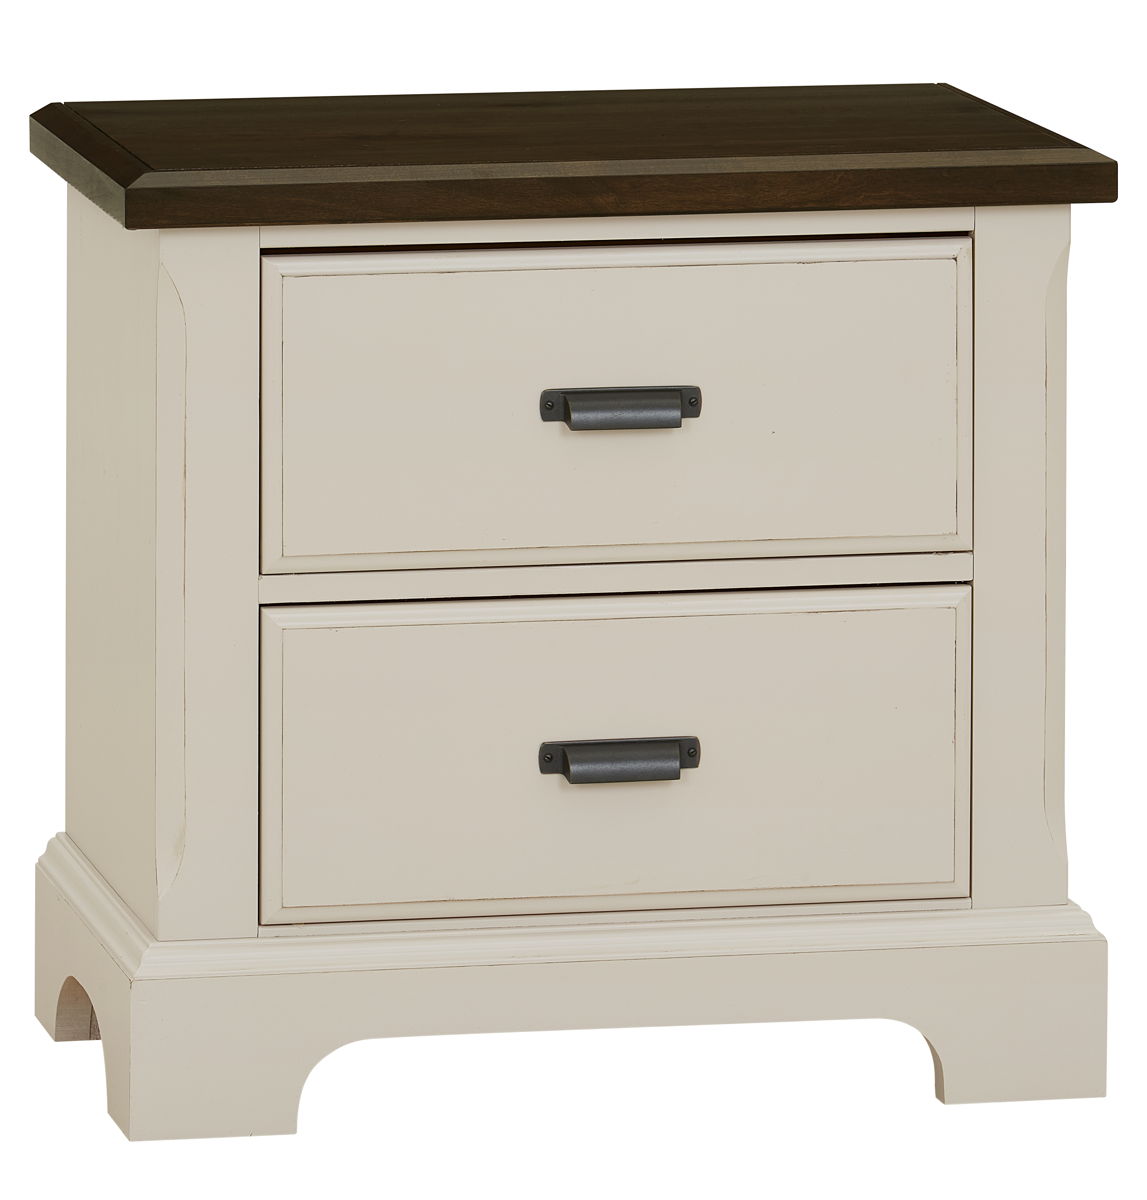 Lancaster County - 2 Drawer Nightstand